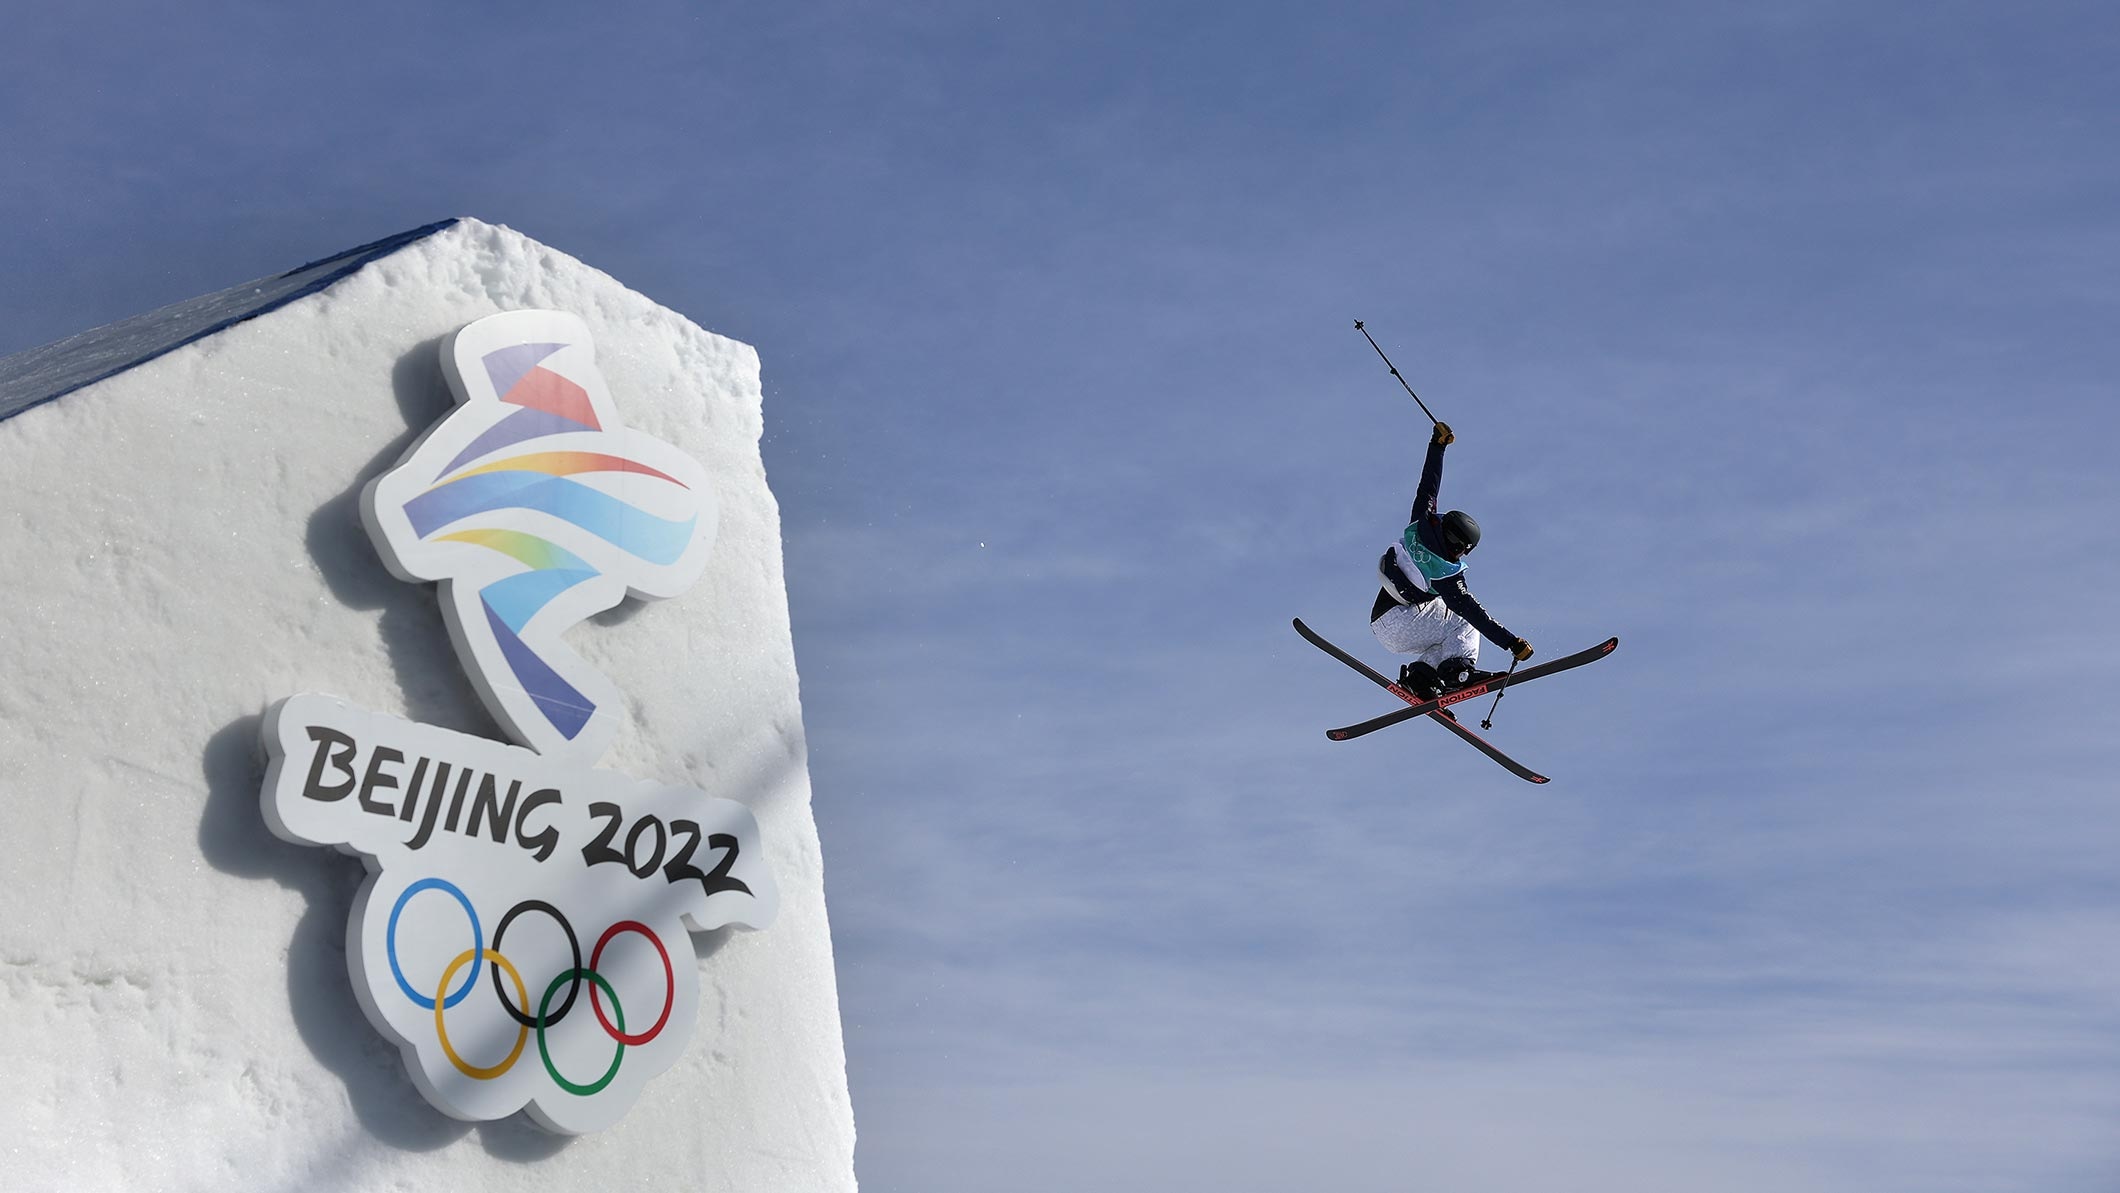 BEIJING, CHINA - FEBRUARY 07: Caroline Claire of Team United States performs a trick during the Women's Freestyle Skiing Freeski Big Air Qualification on Day 3 of the Beijing 2022 Winter Olympic Games at Big Air Shougang on February 07, 2022 in Beijing, China. (Photo by Richard Heathcote/Getty Images)